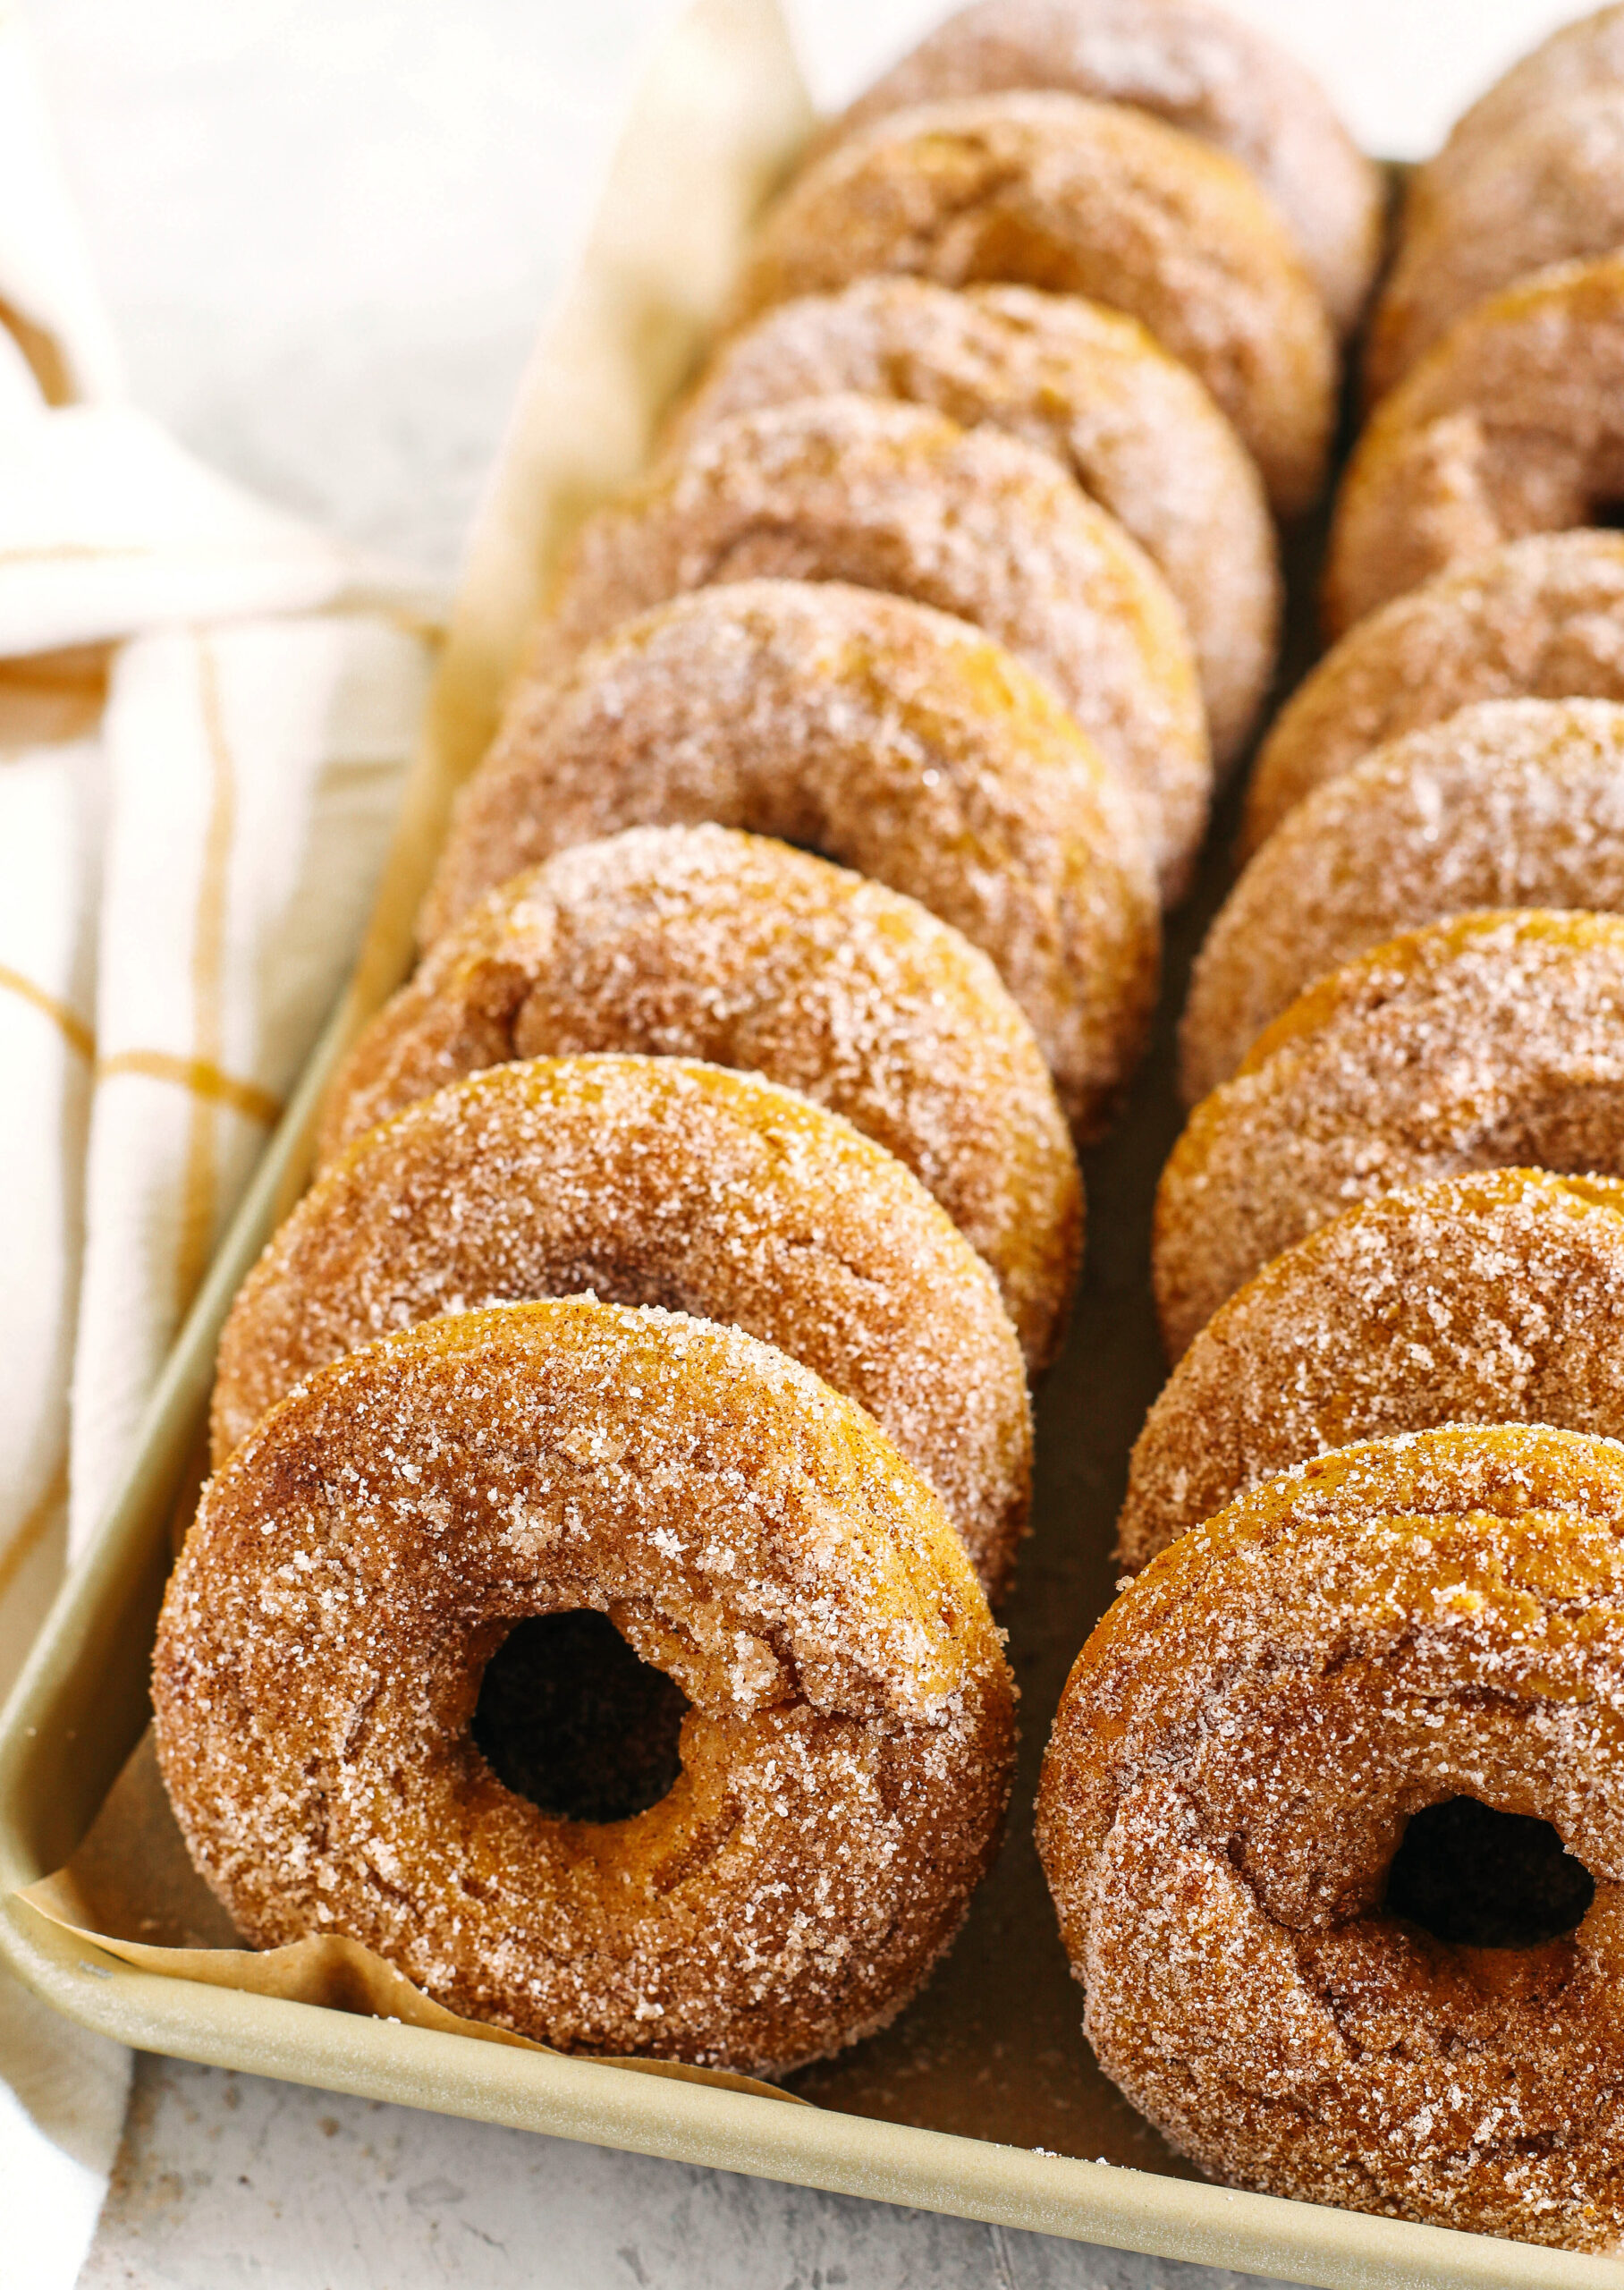 Delicious Gluten-Free Pumpkin Spice Donuts that are soft, lightly sweetened with maple syrup and baked, not fried, for the perfect fall treat!  Loaded with warm spices and coated with cinnamon and sugar!